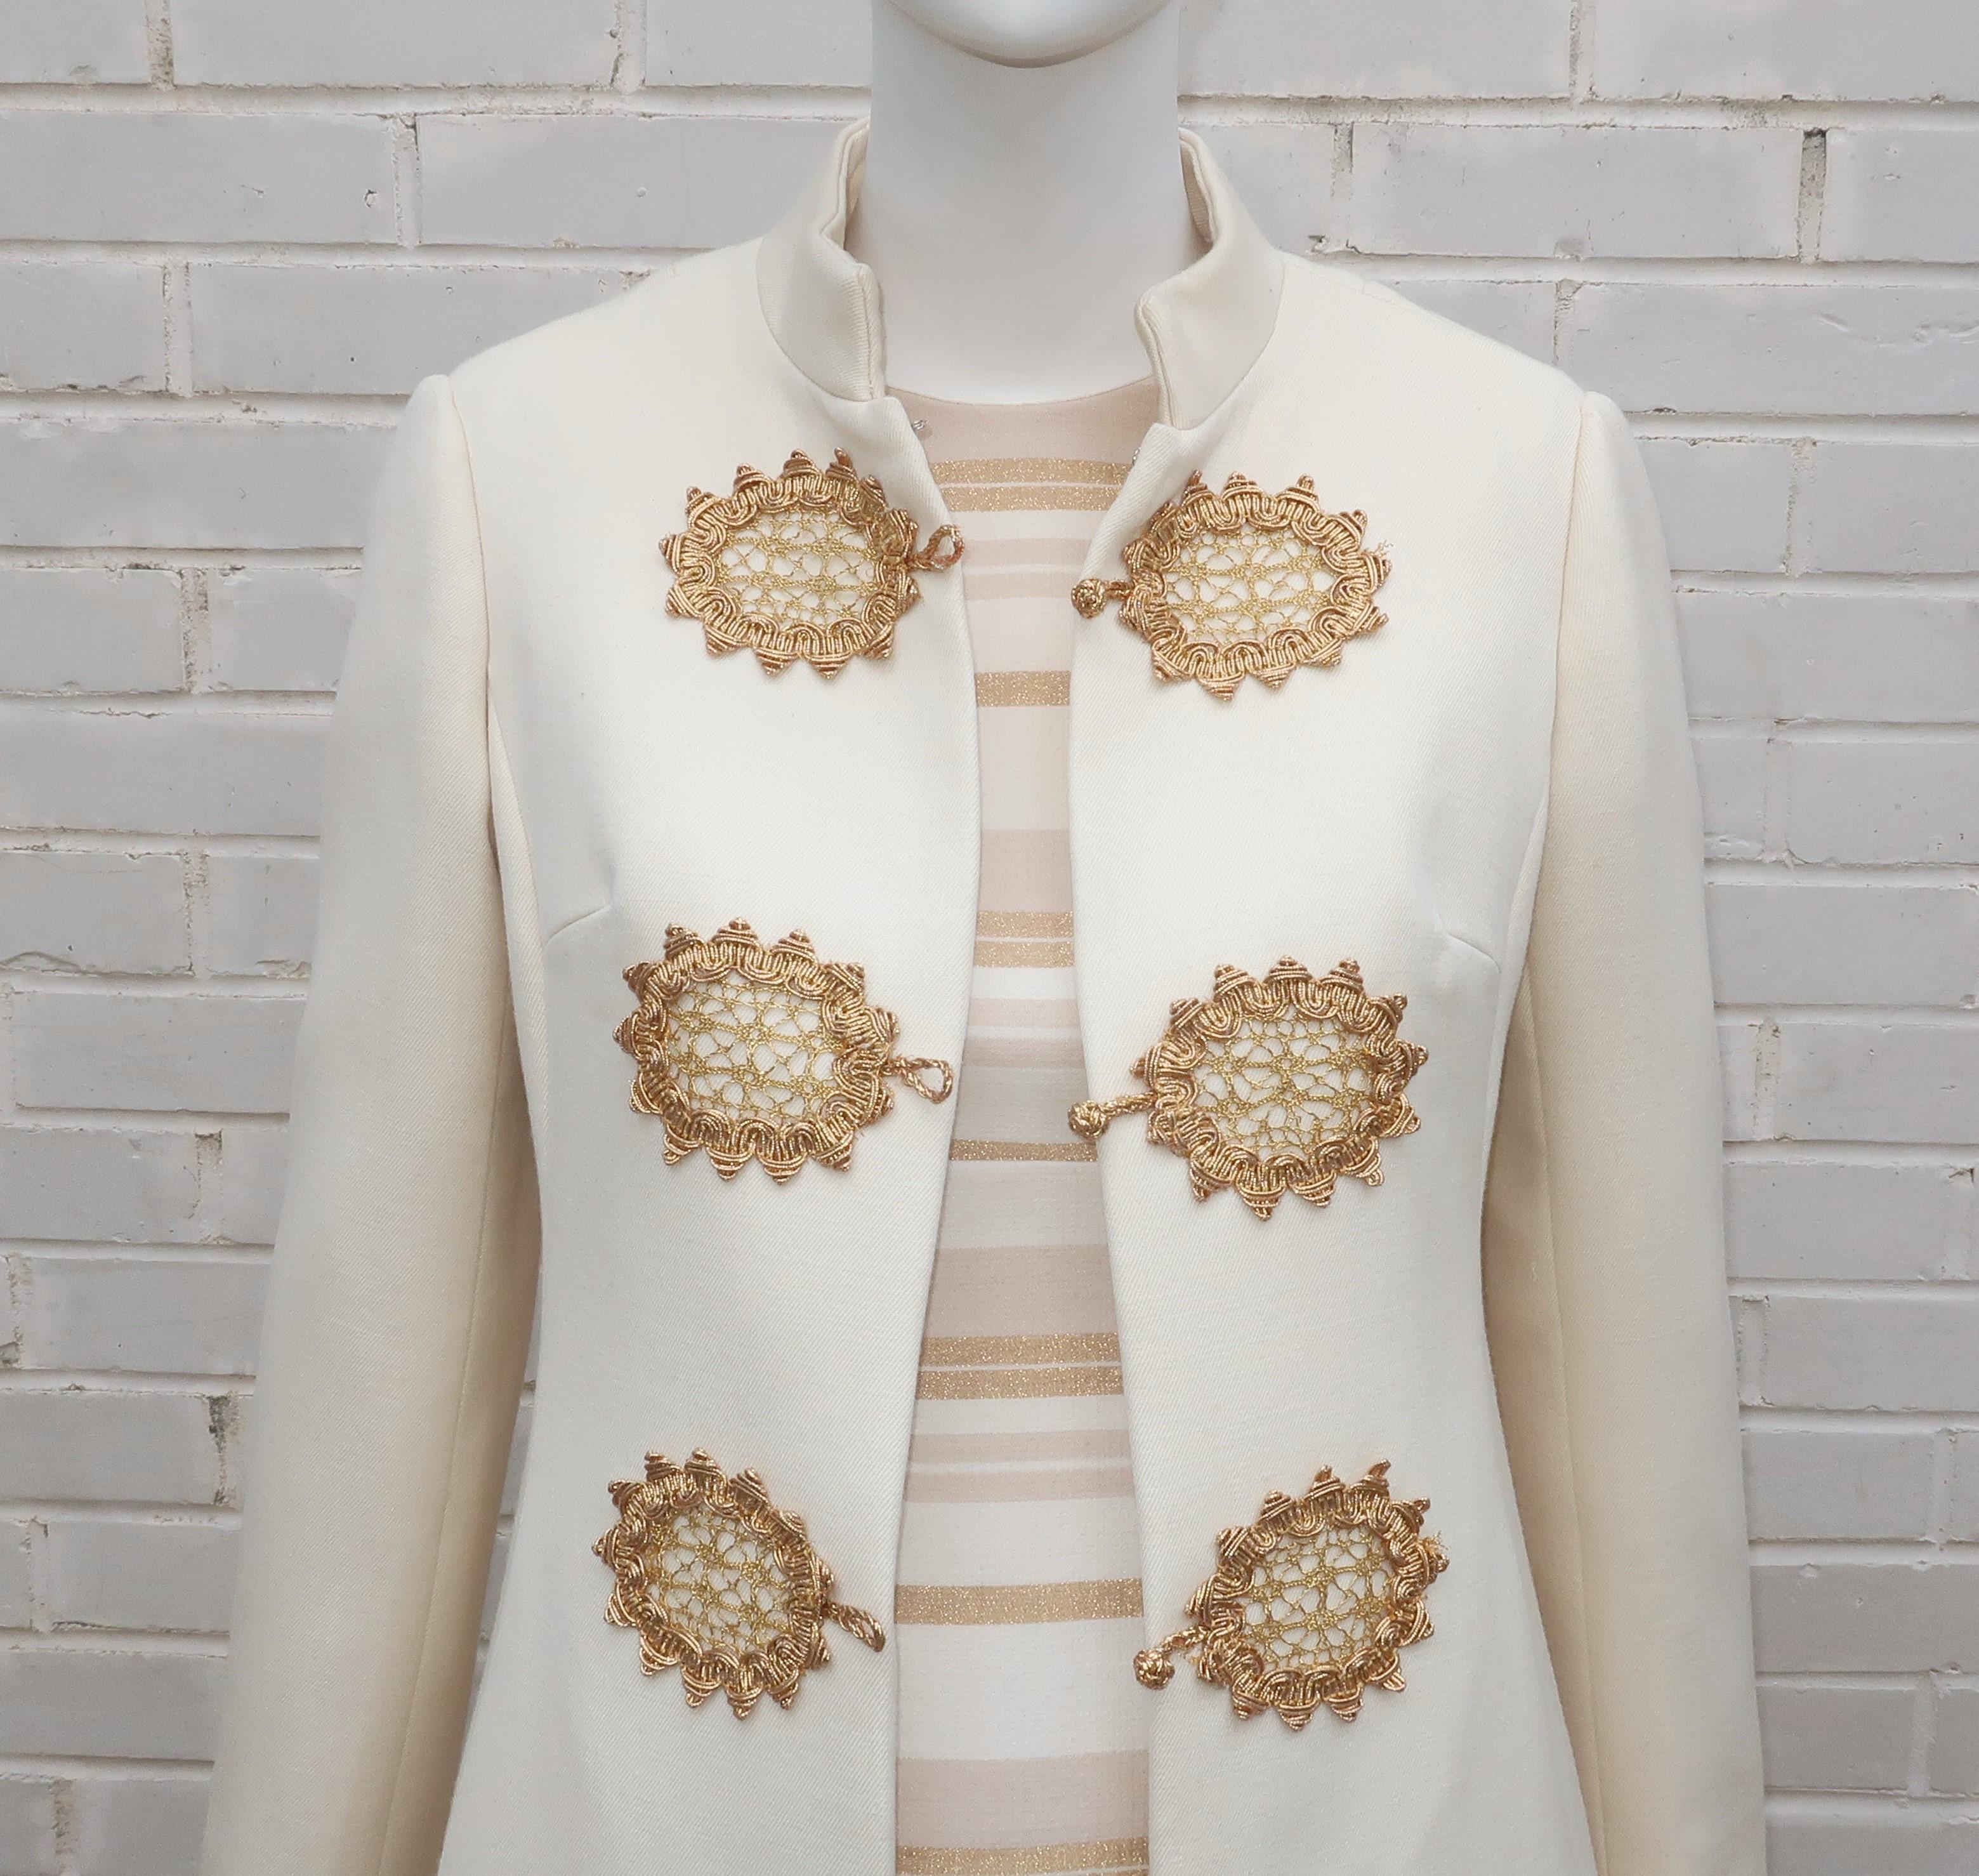 1960's Dynasty cocktail dress and coat ensemble in a wool blend winter white fabric with metallic gold accents.  The fabulous Nehru style coat buttons at the front with gold braided frog closures and hidden side pockets.  The simple sleeveless shift